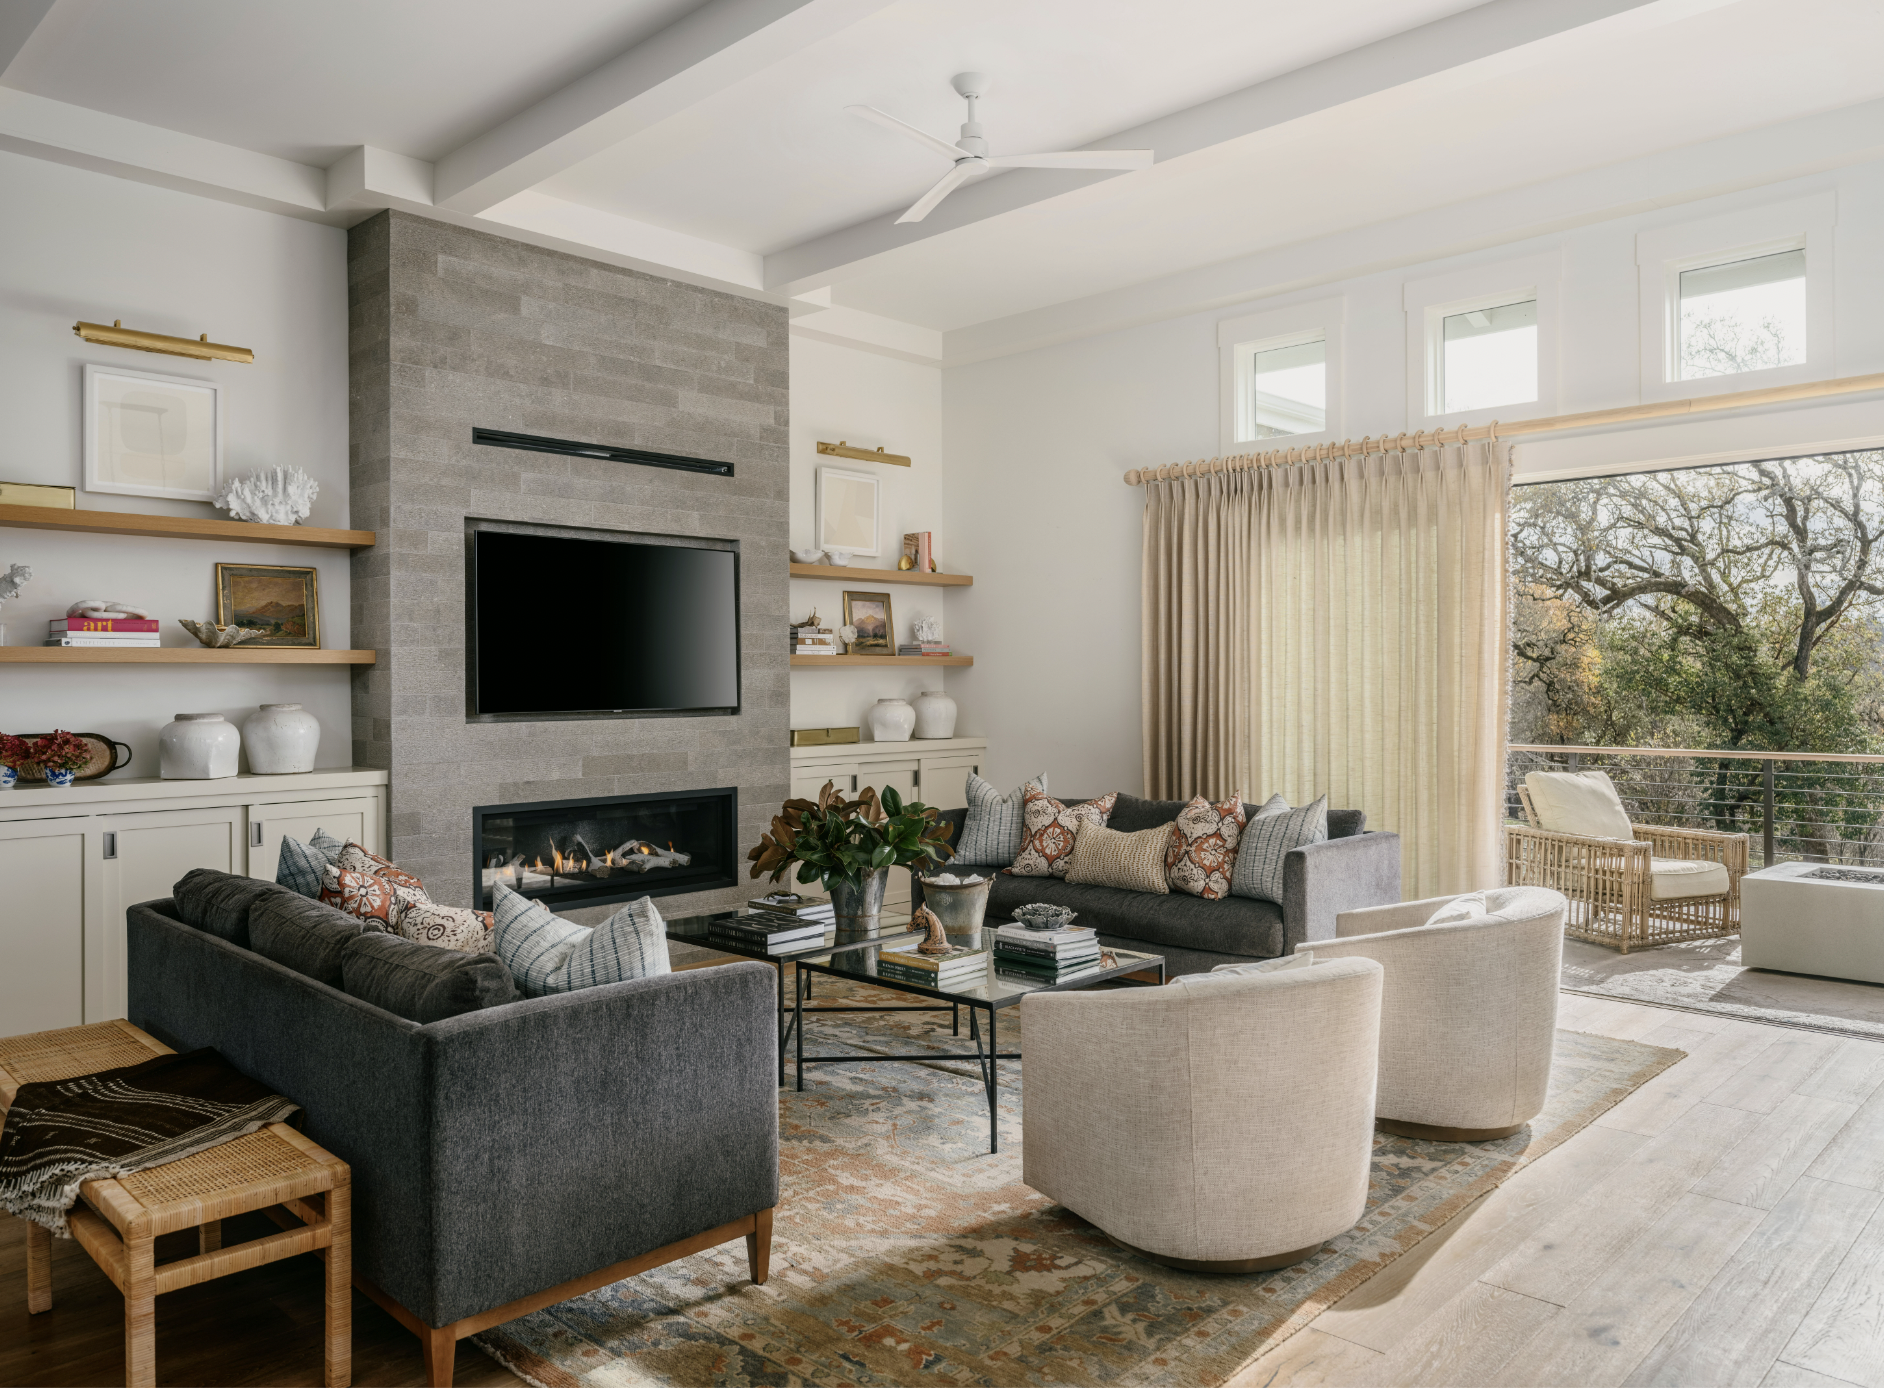  A living area with a modern stone fireplace. A TV is inset above the fireplace. Chairs and two couches surround a coffee table at the center of the room. Floating wooden shelves hold curated objects on both sides of the fireplace.  